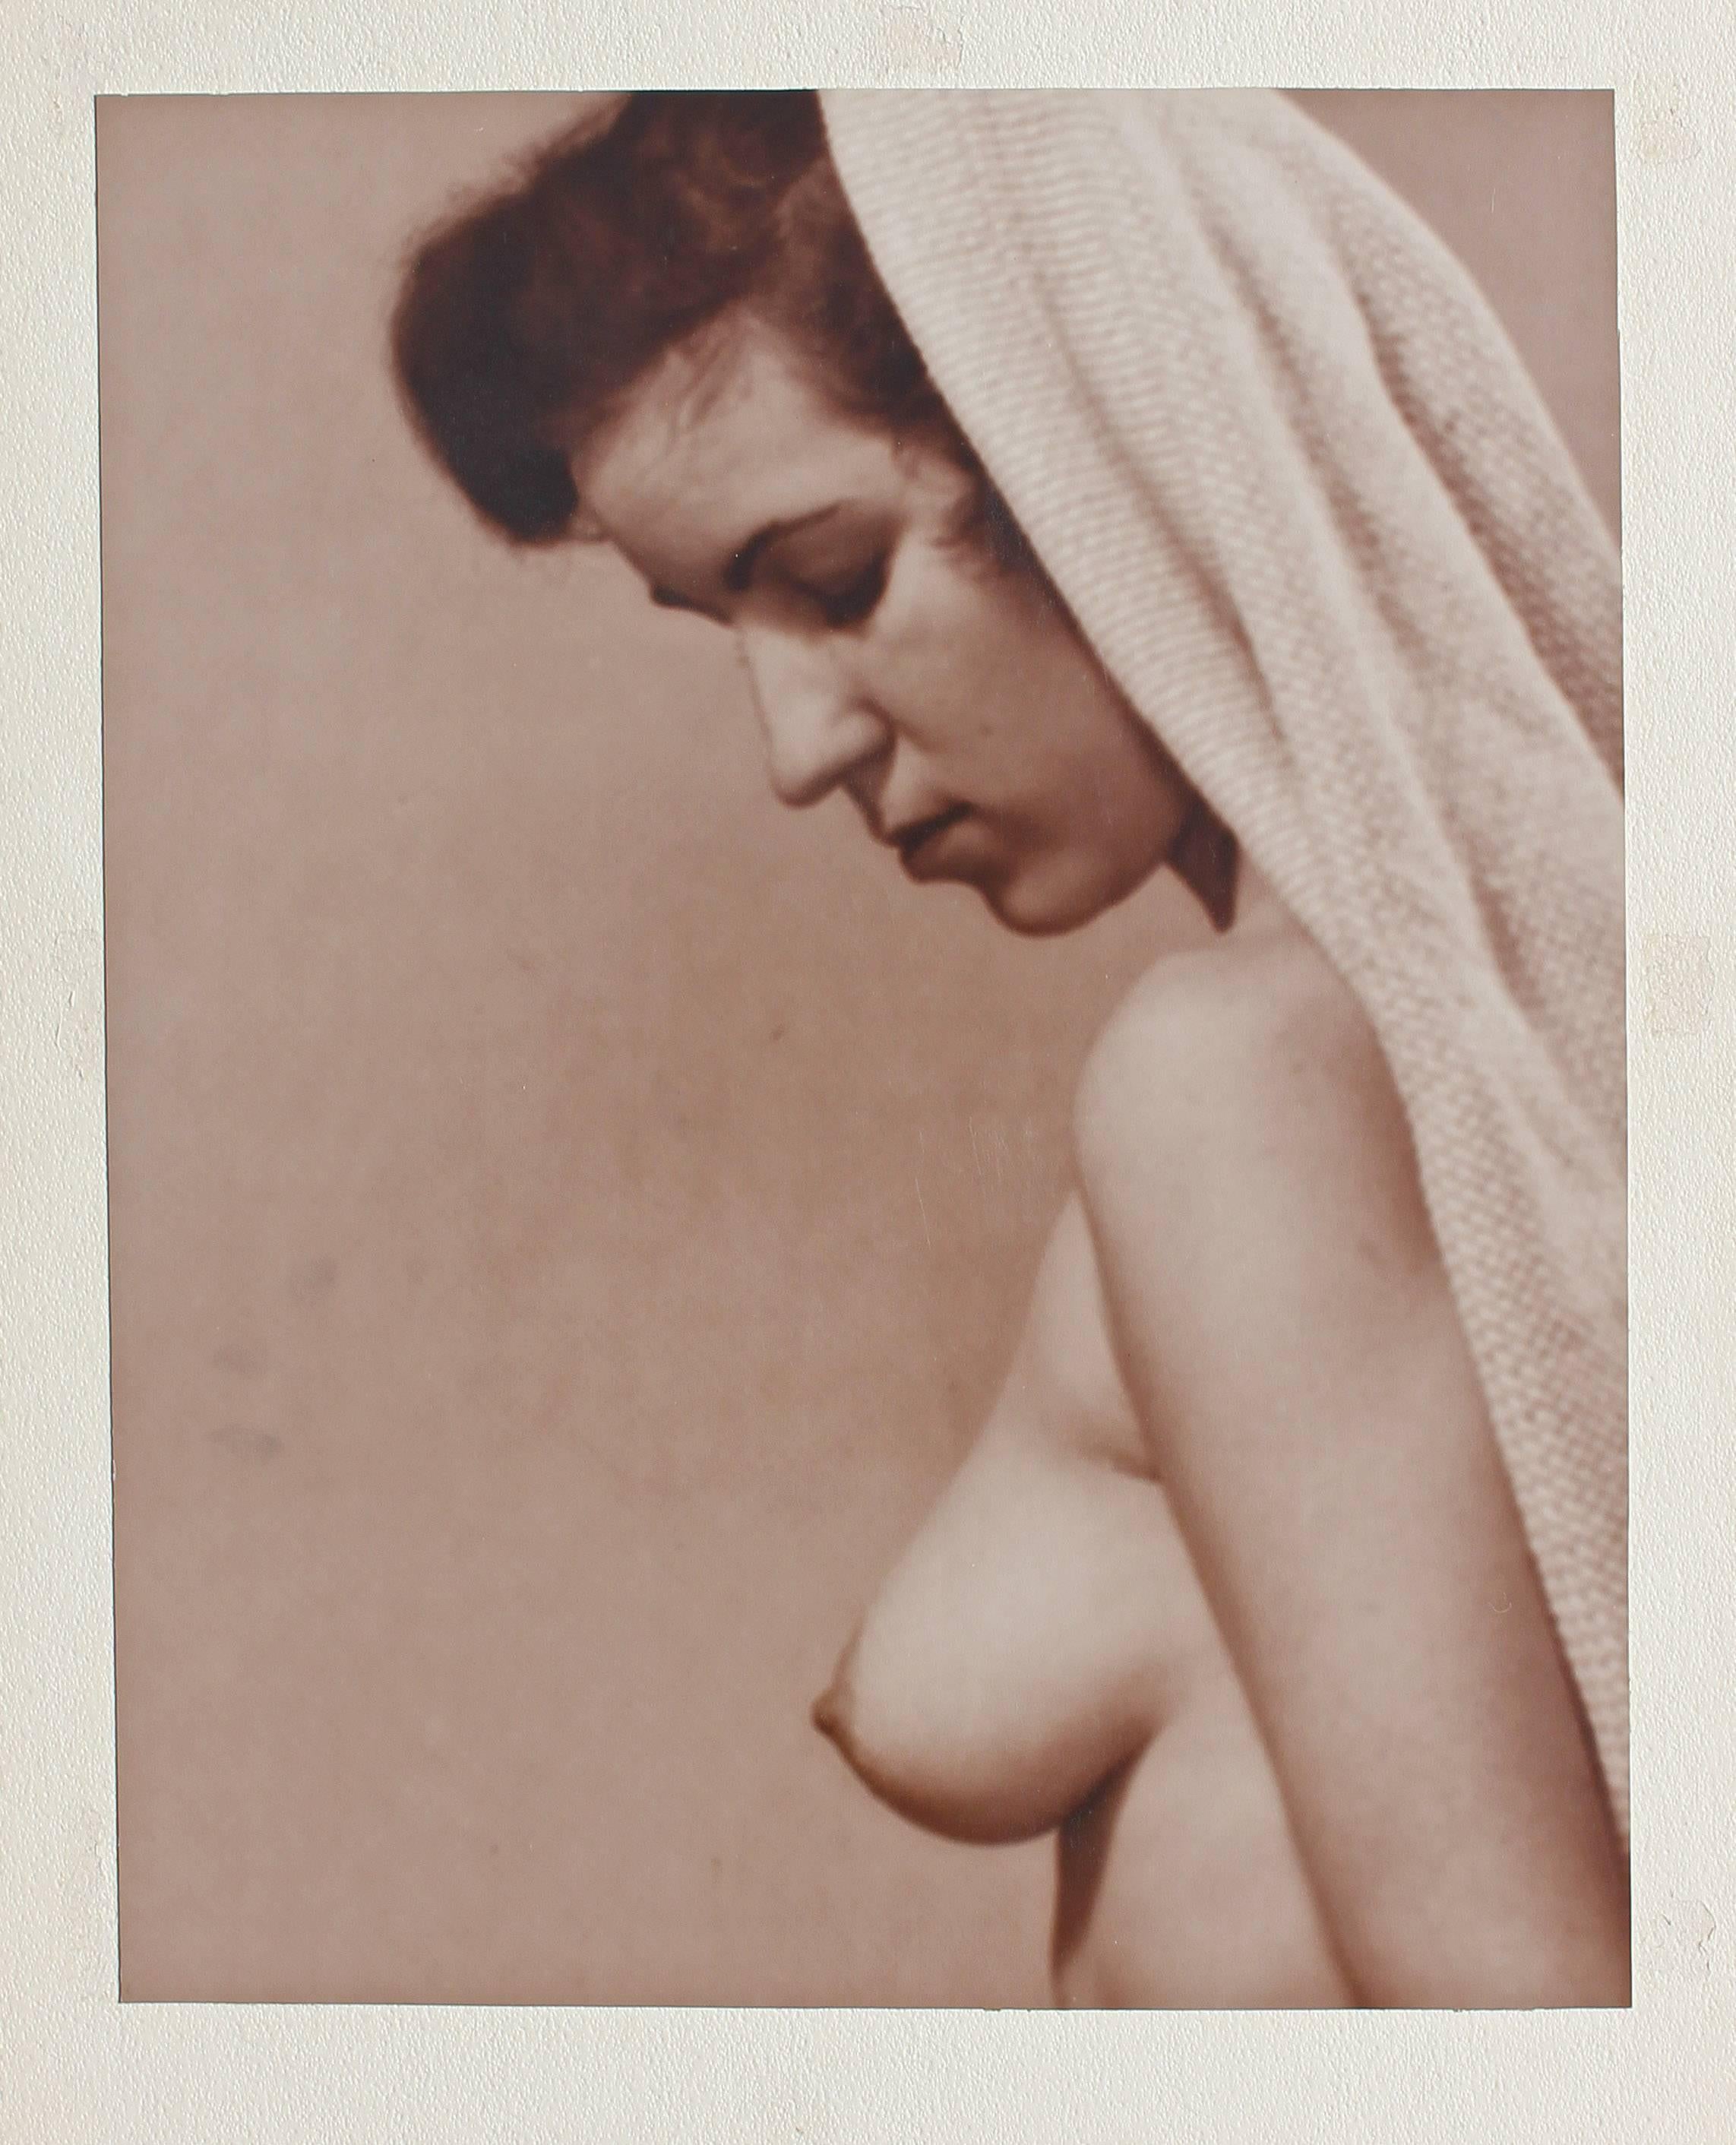 Allegorical nude, large format vintage photograph. Attributed to Paul H. Oelman, American, 1880-1957.